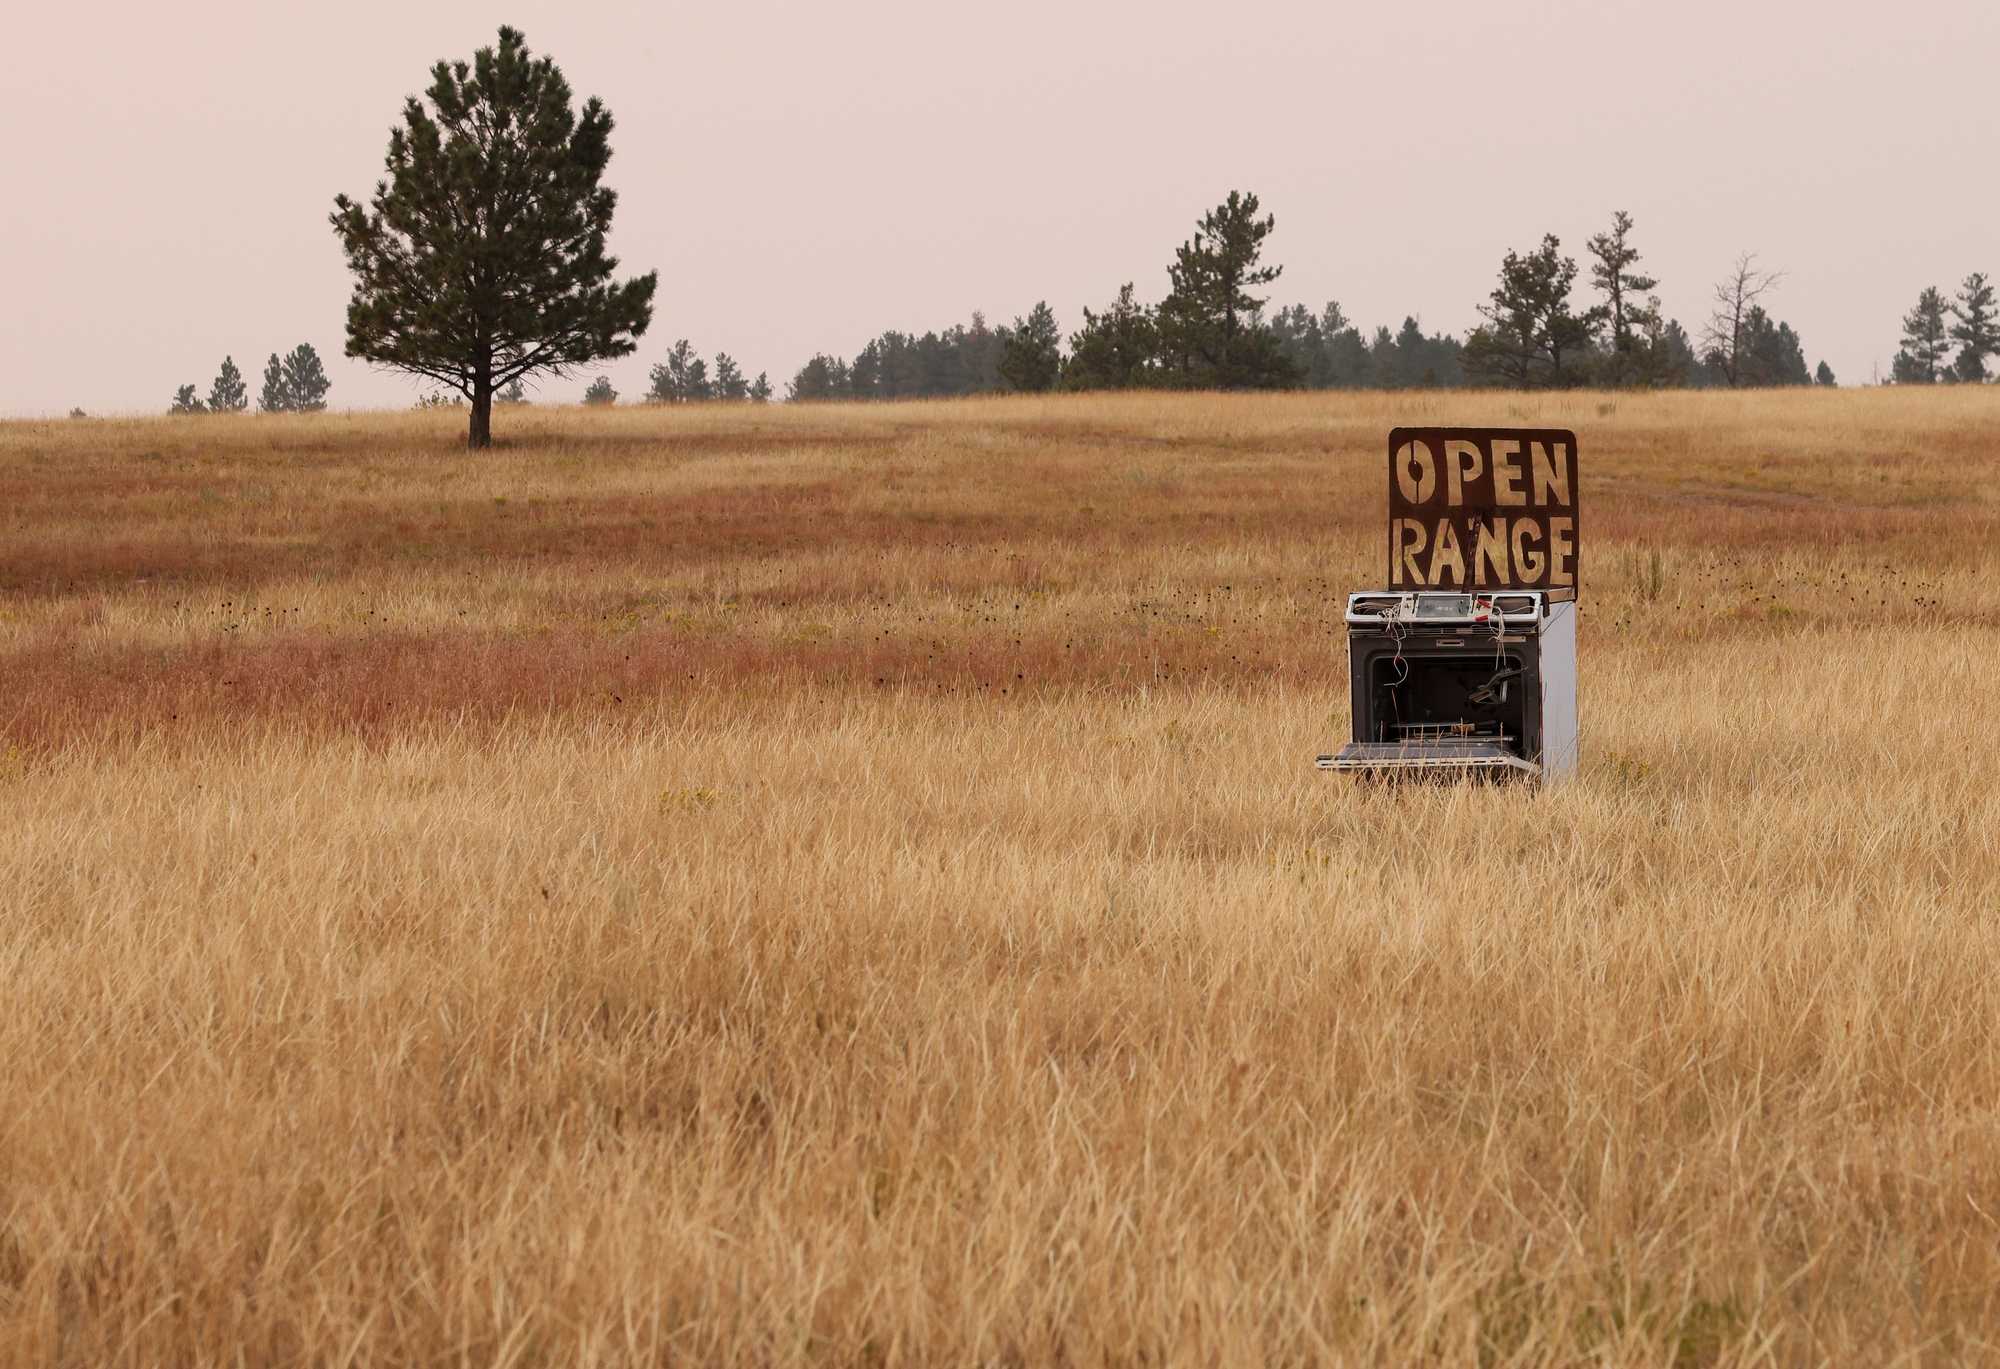 A comical sign rests in a field along Route 18 not far from the border of South Dakota and Wyoming.  